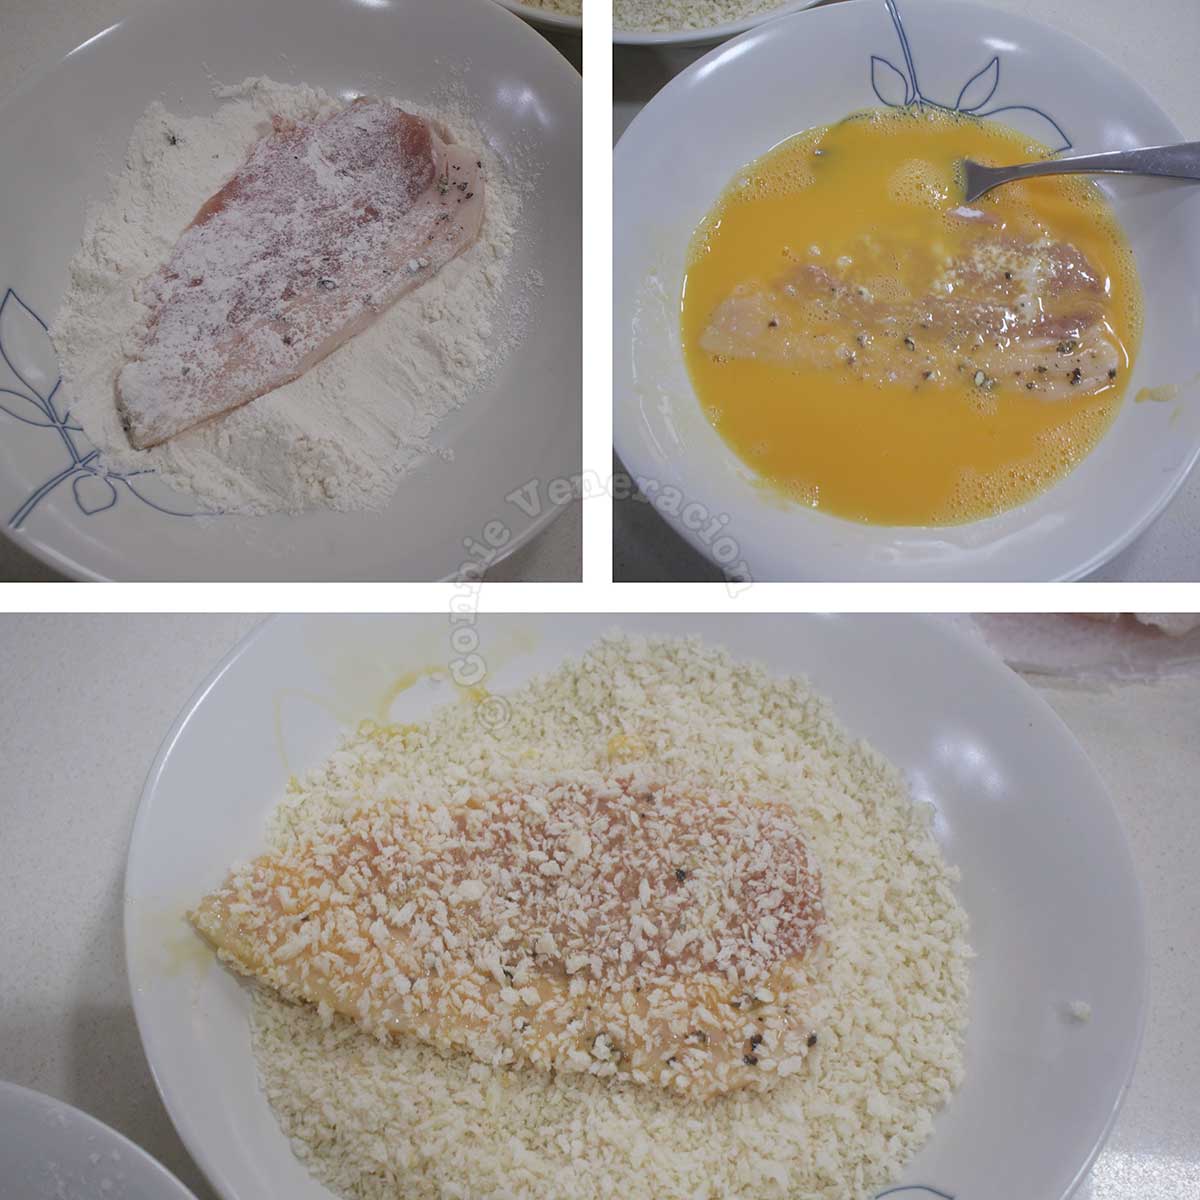 Pork cutlet dredged in flour, dipped in egg and coated with panko